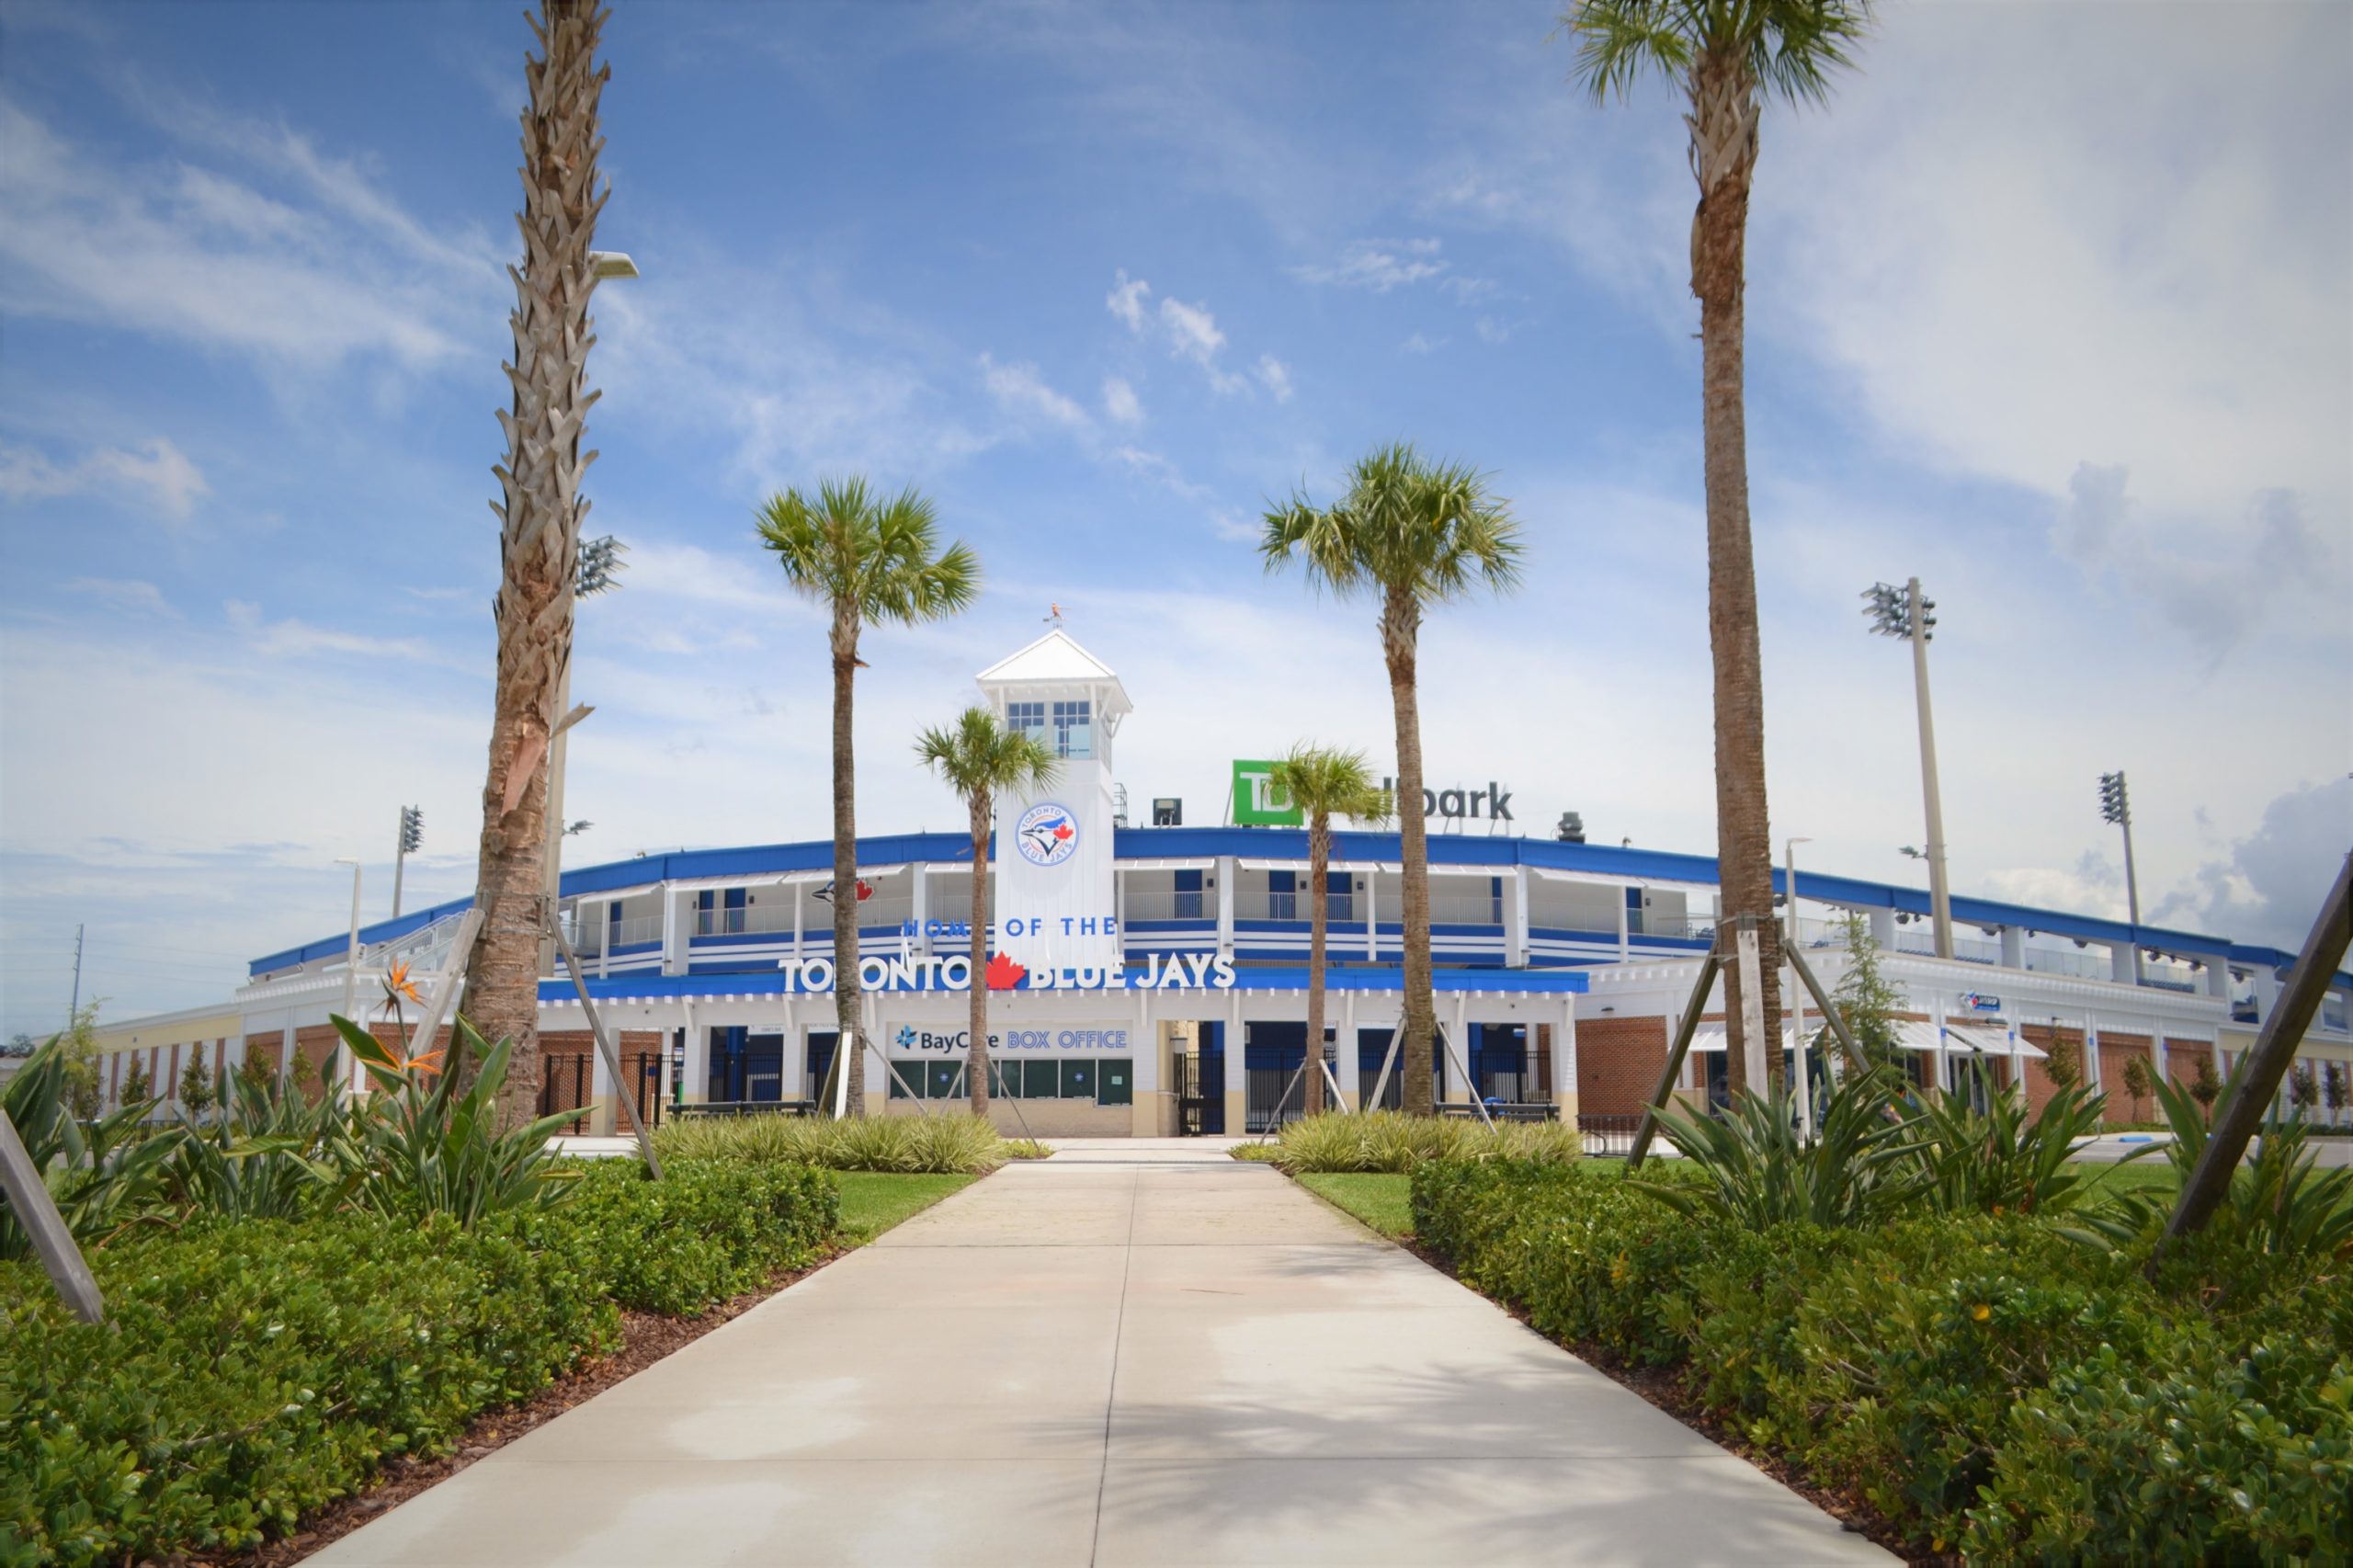 TD Stadium, spring training home of the Toronto Blue Jays, on a sunny day